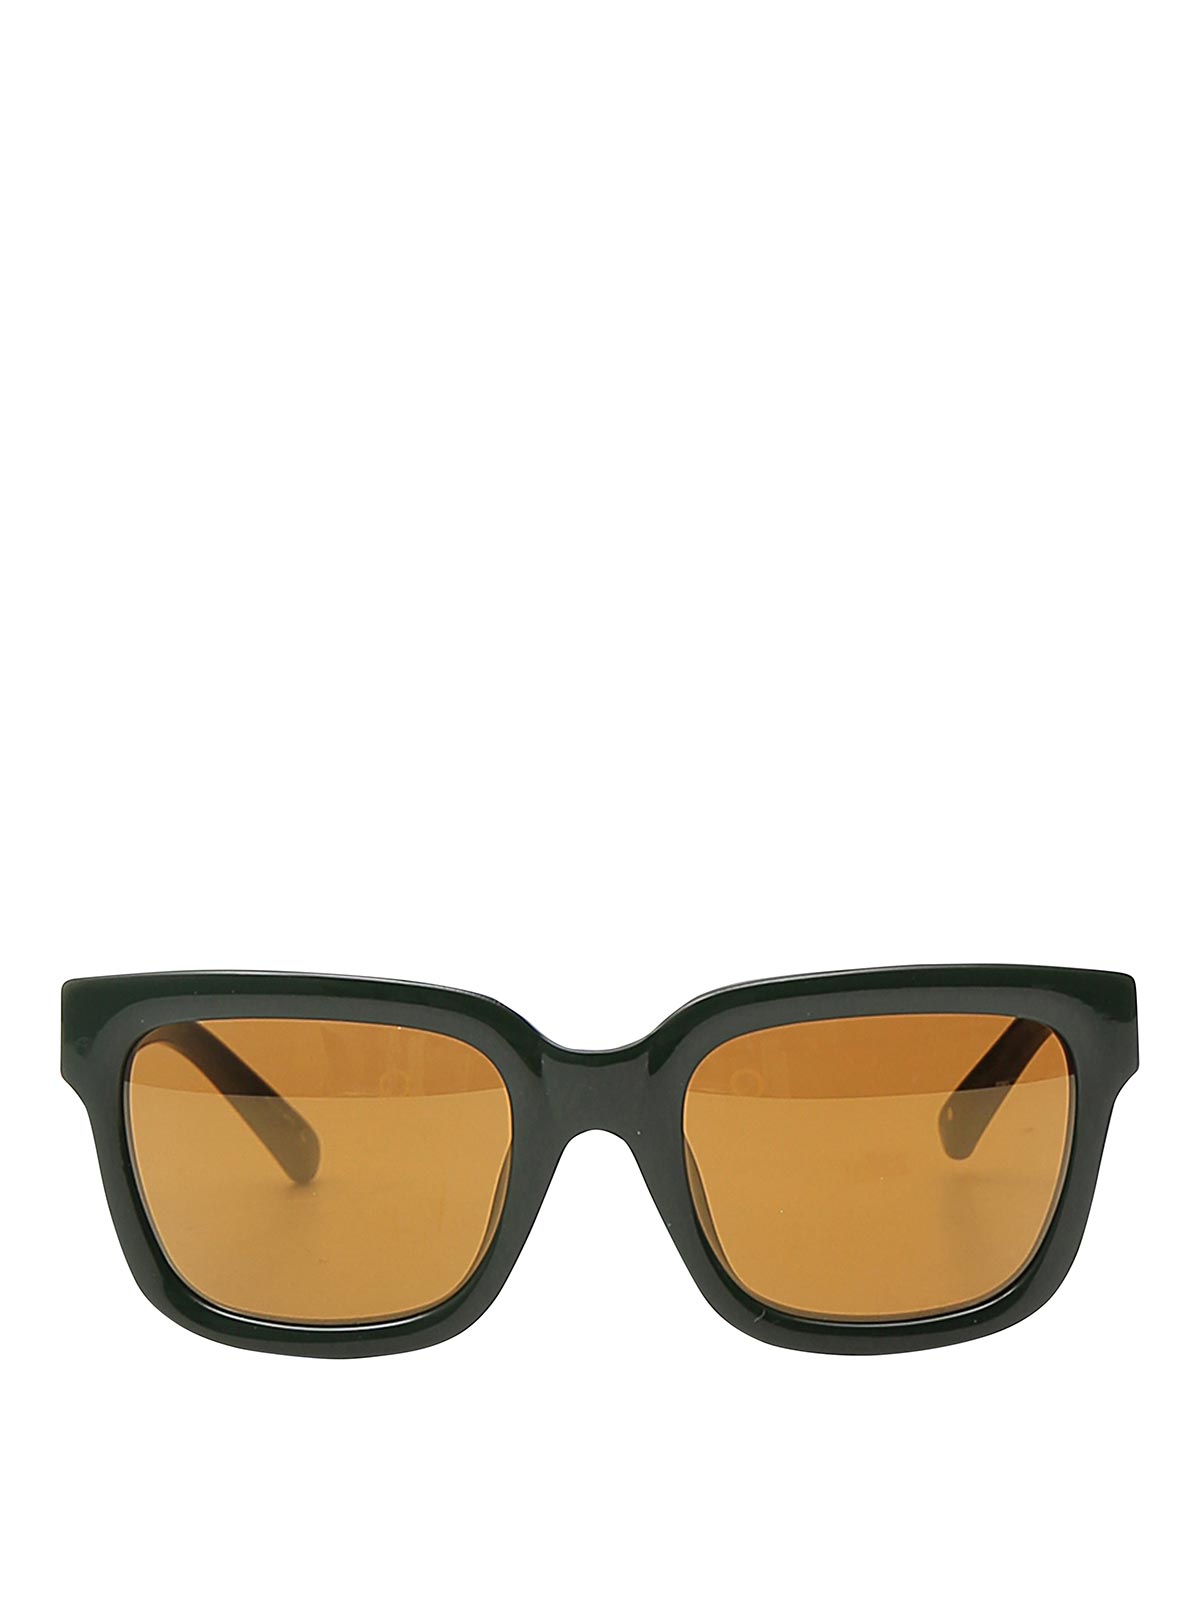 Shop Linda Farrow Sunglasses In Green With Light Brown Lenses